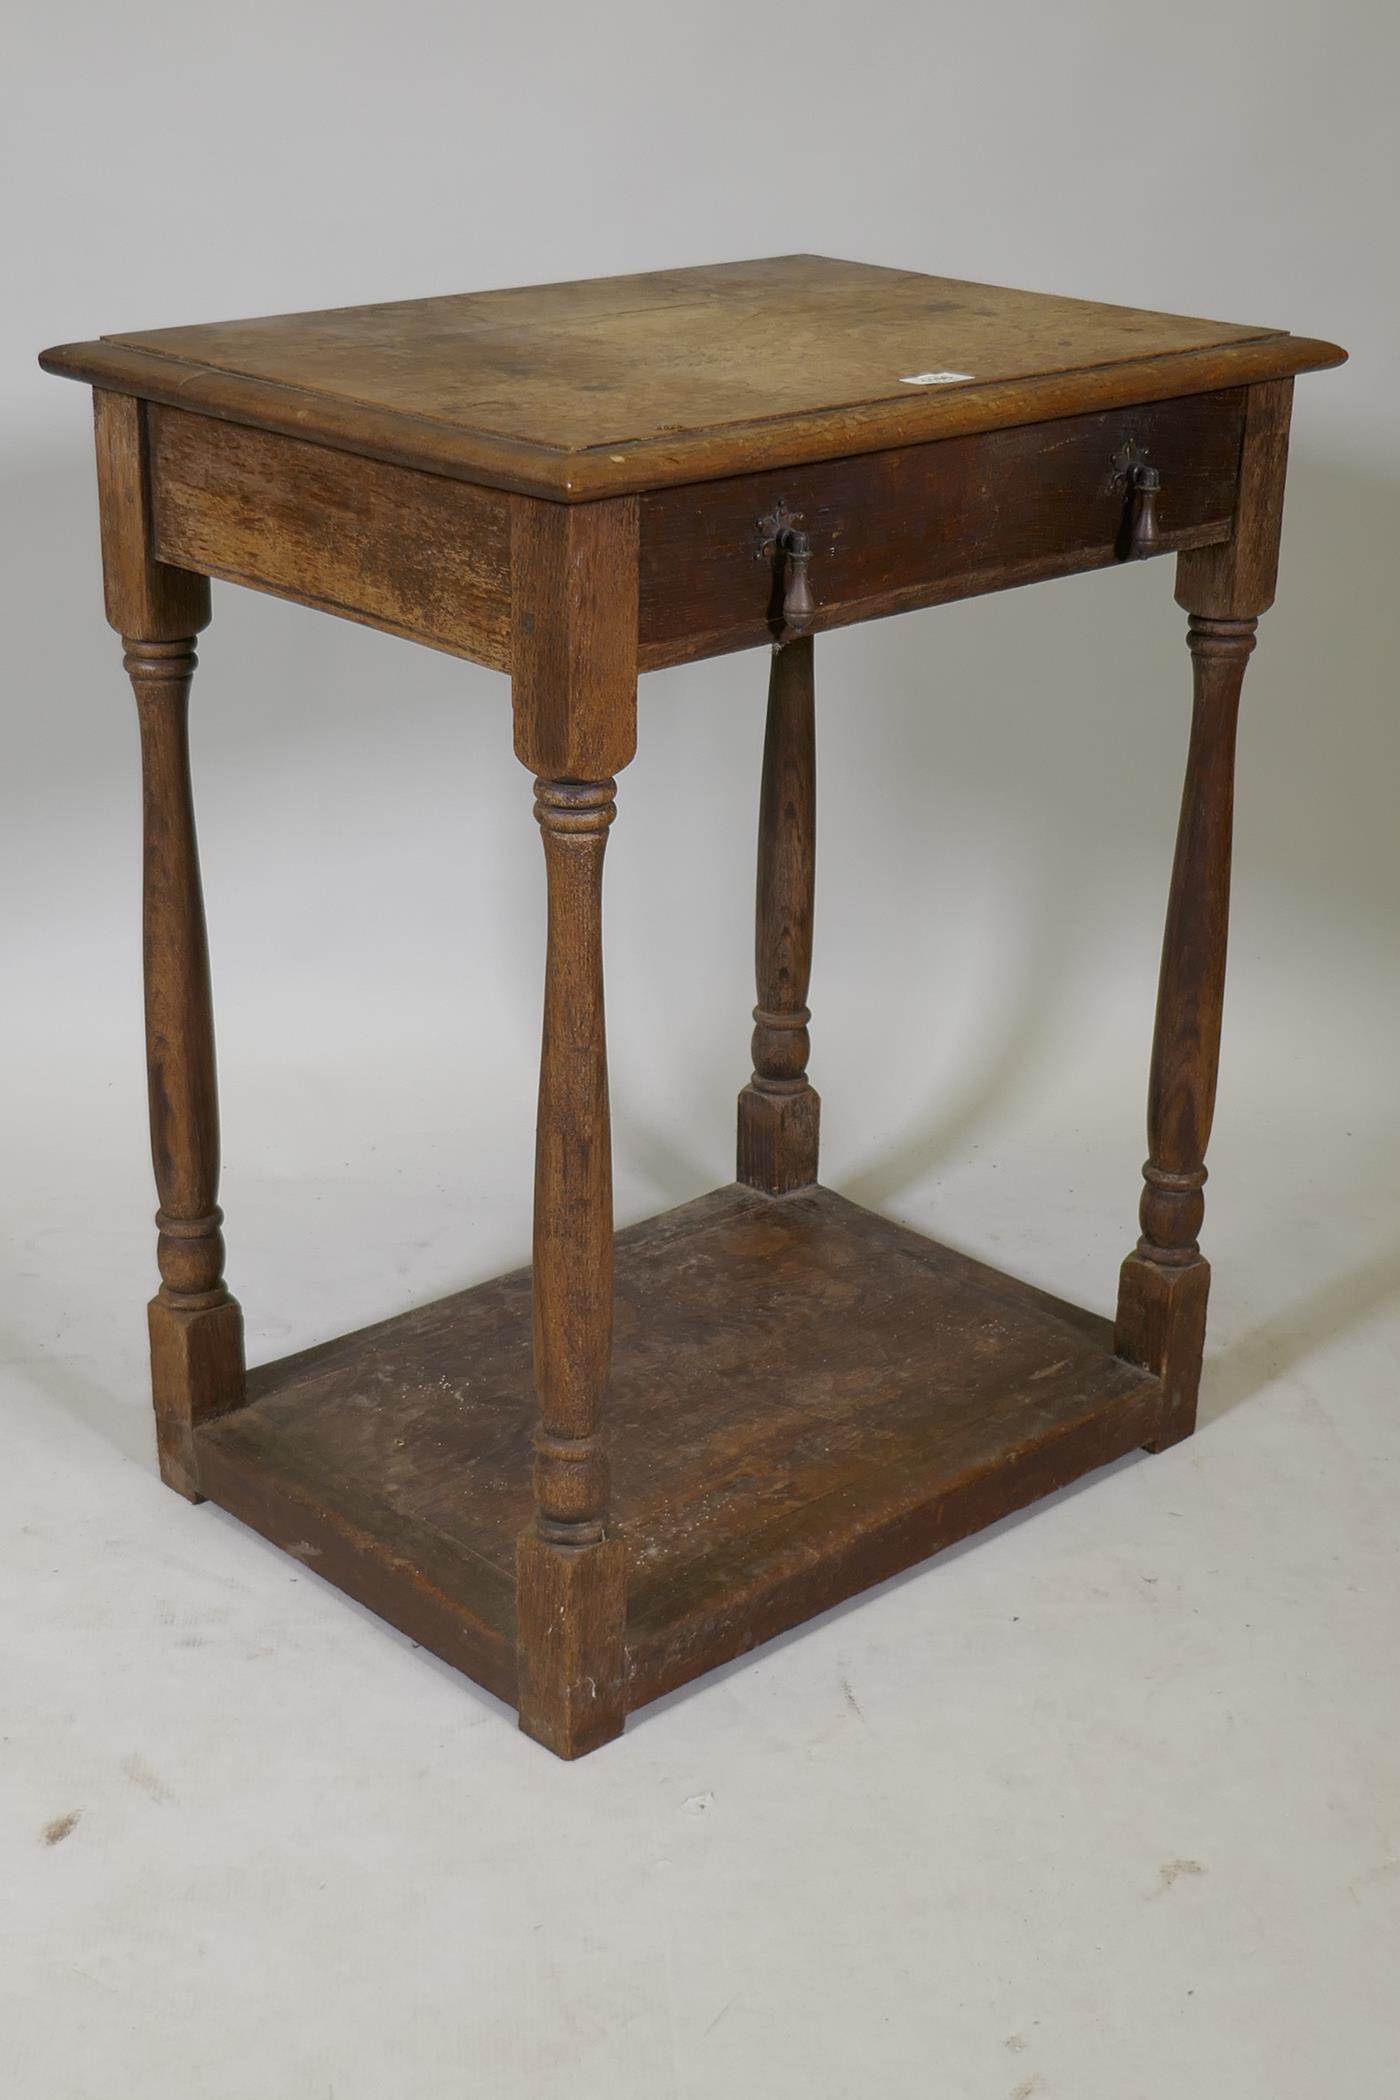 A C19th oak single drawer side table, raised on turned supports with a pot board, 24" x 18" x 29" - Image 3 of 3